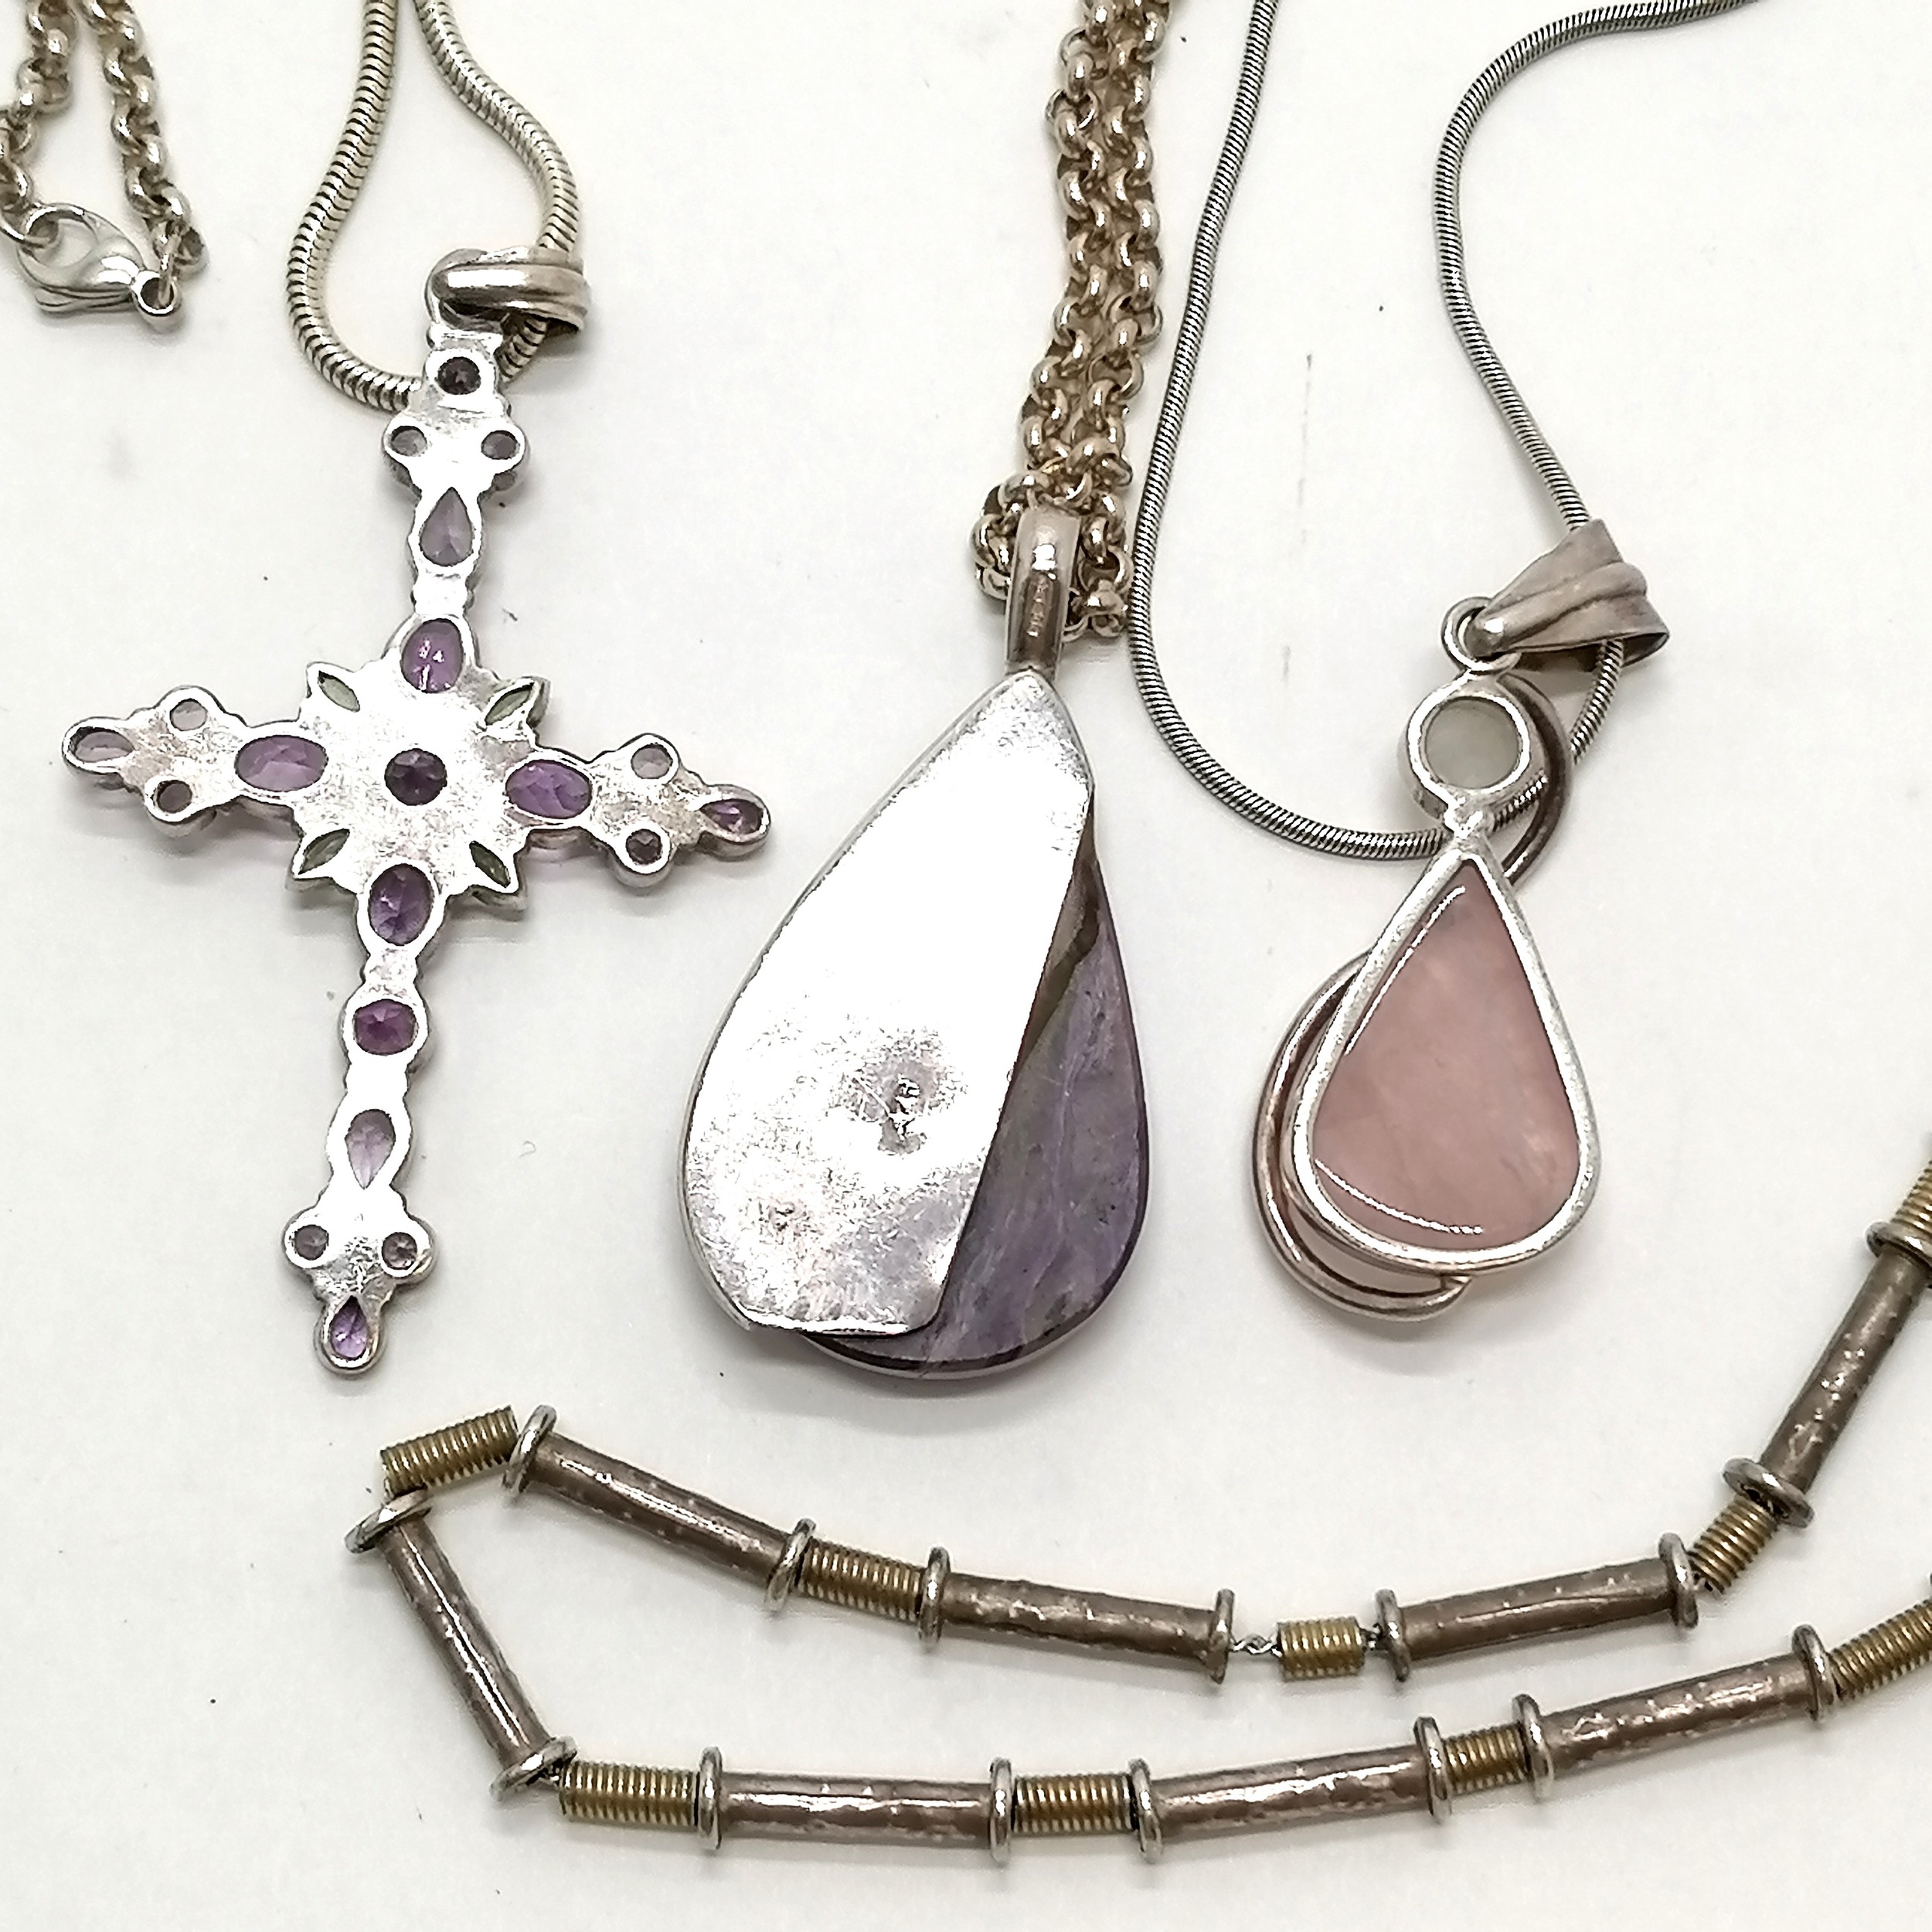 3 x silver necklaces (3 with stone set pendants inc amethyst / peridot cross) t/w fancy link - Image 2 of 2